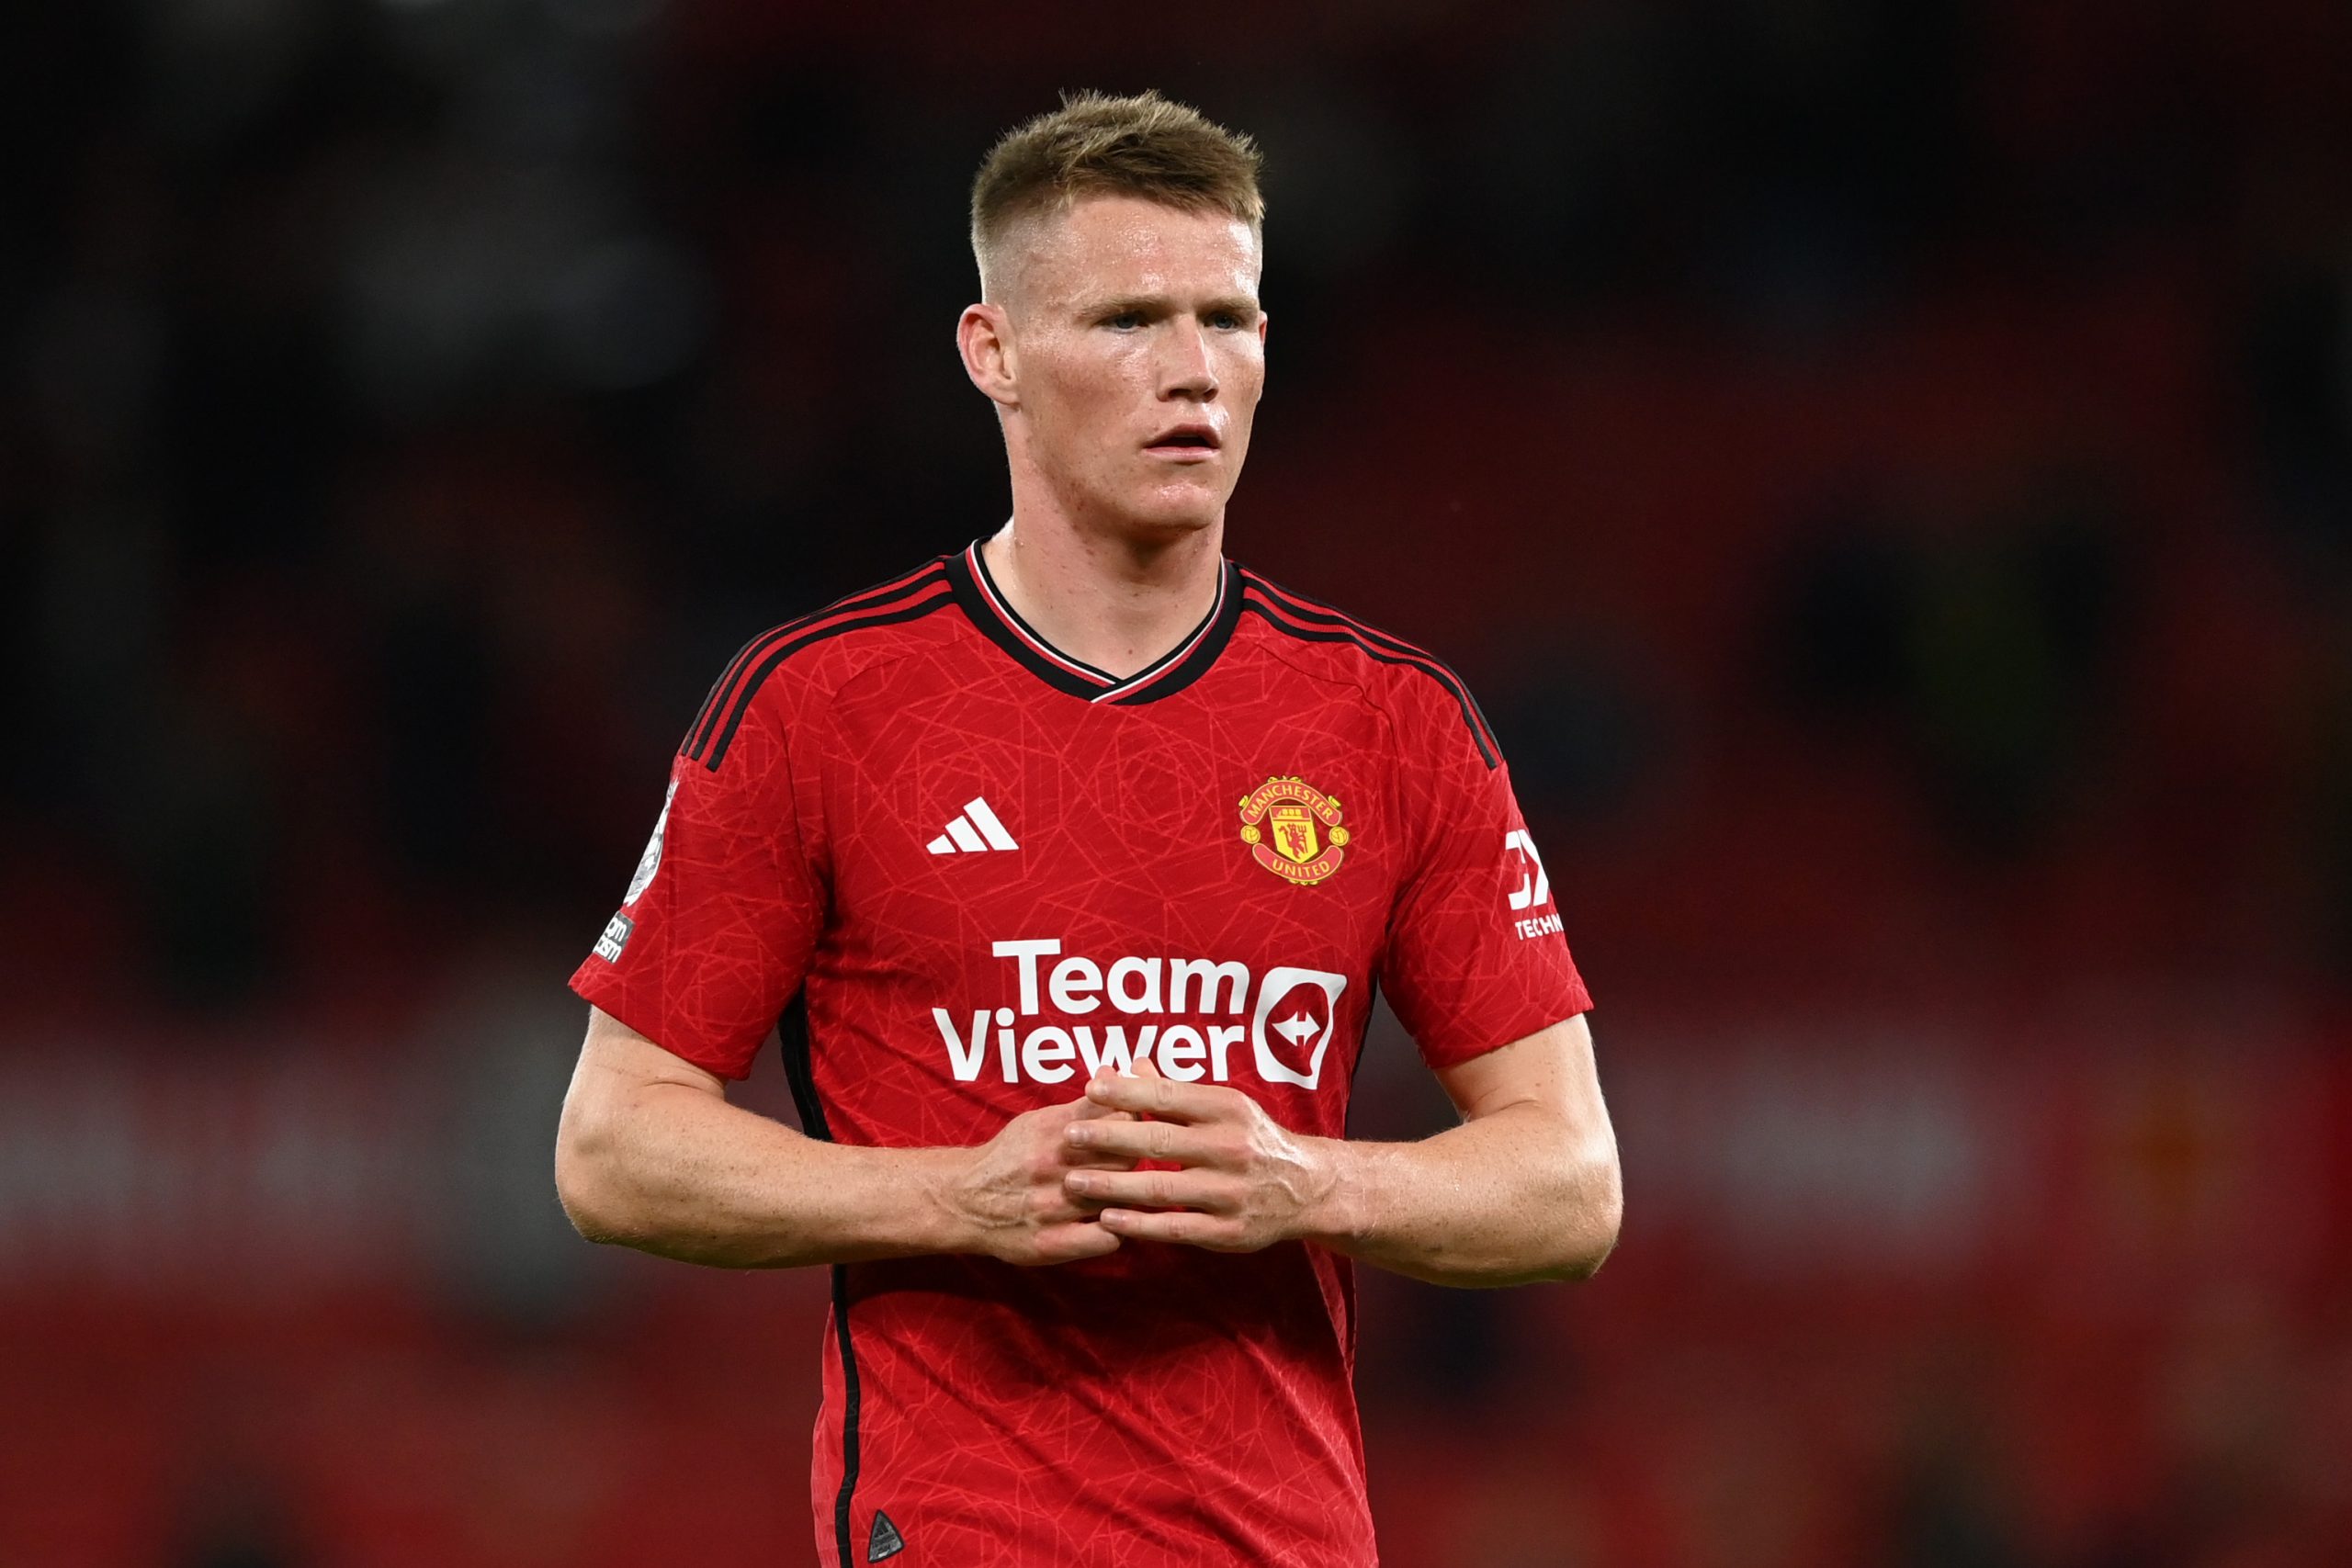 Manchester United midfielder Scott McTominay helped his club extend to the 12 league games unbeaten run against Chelsea.